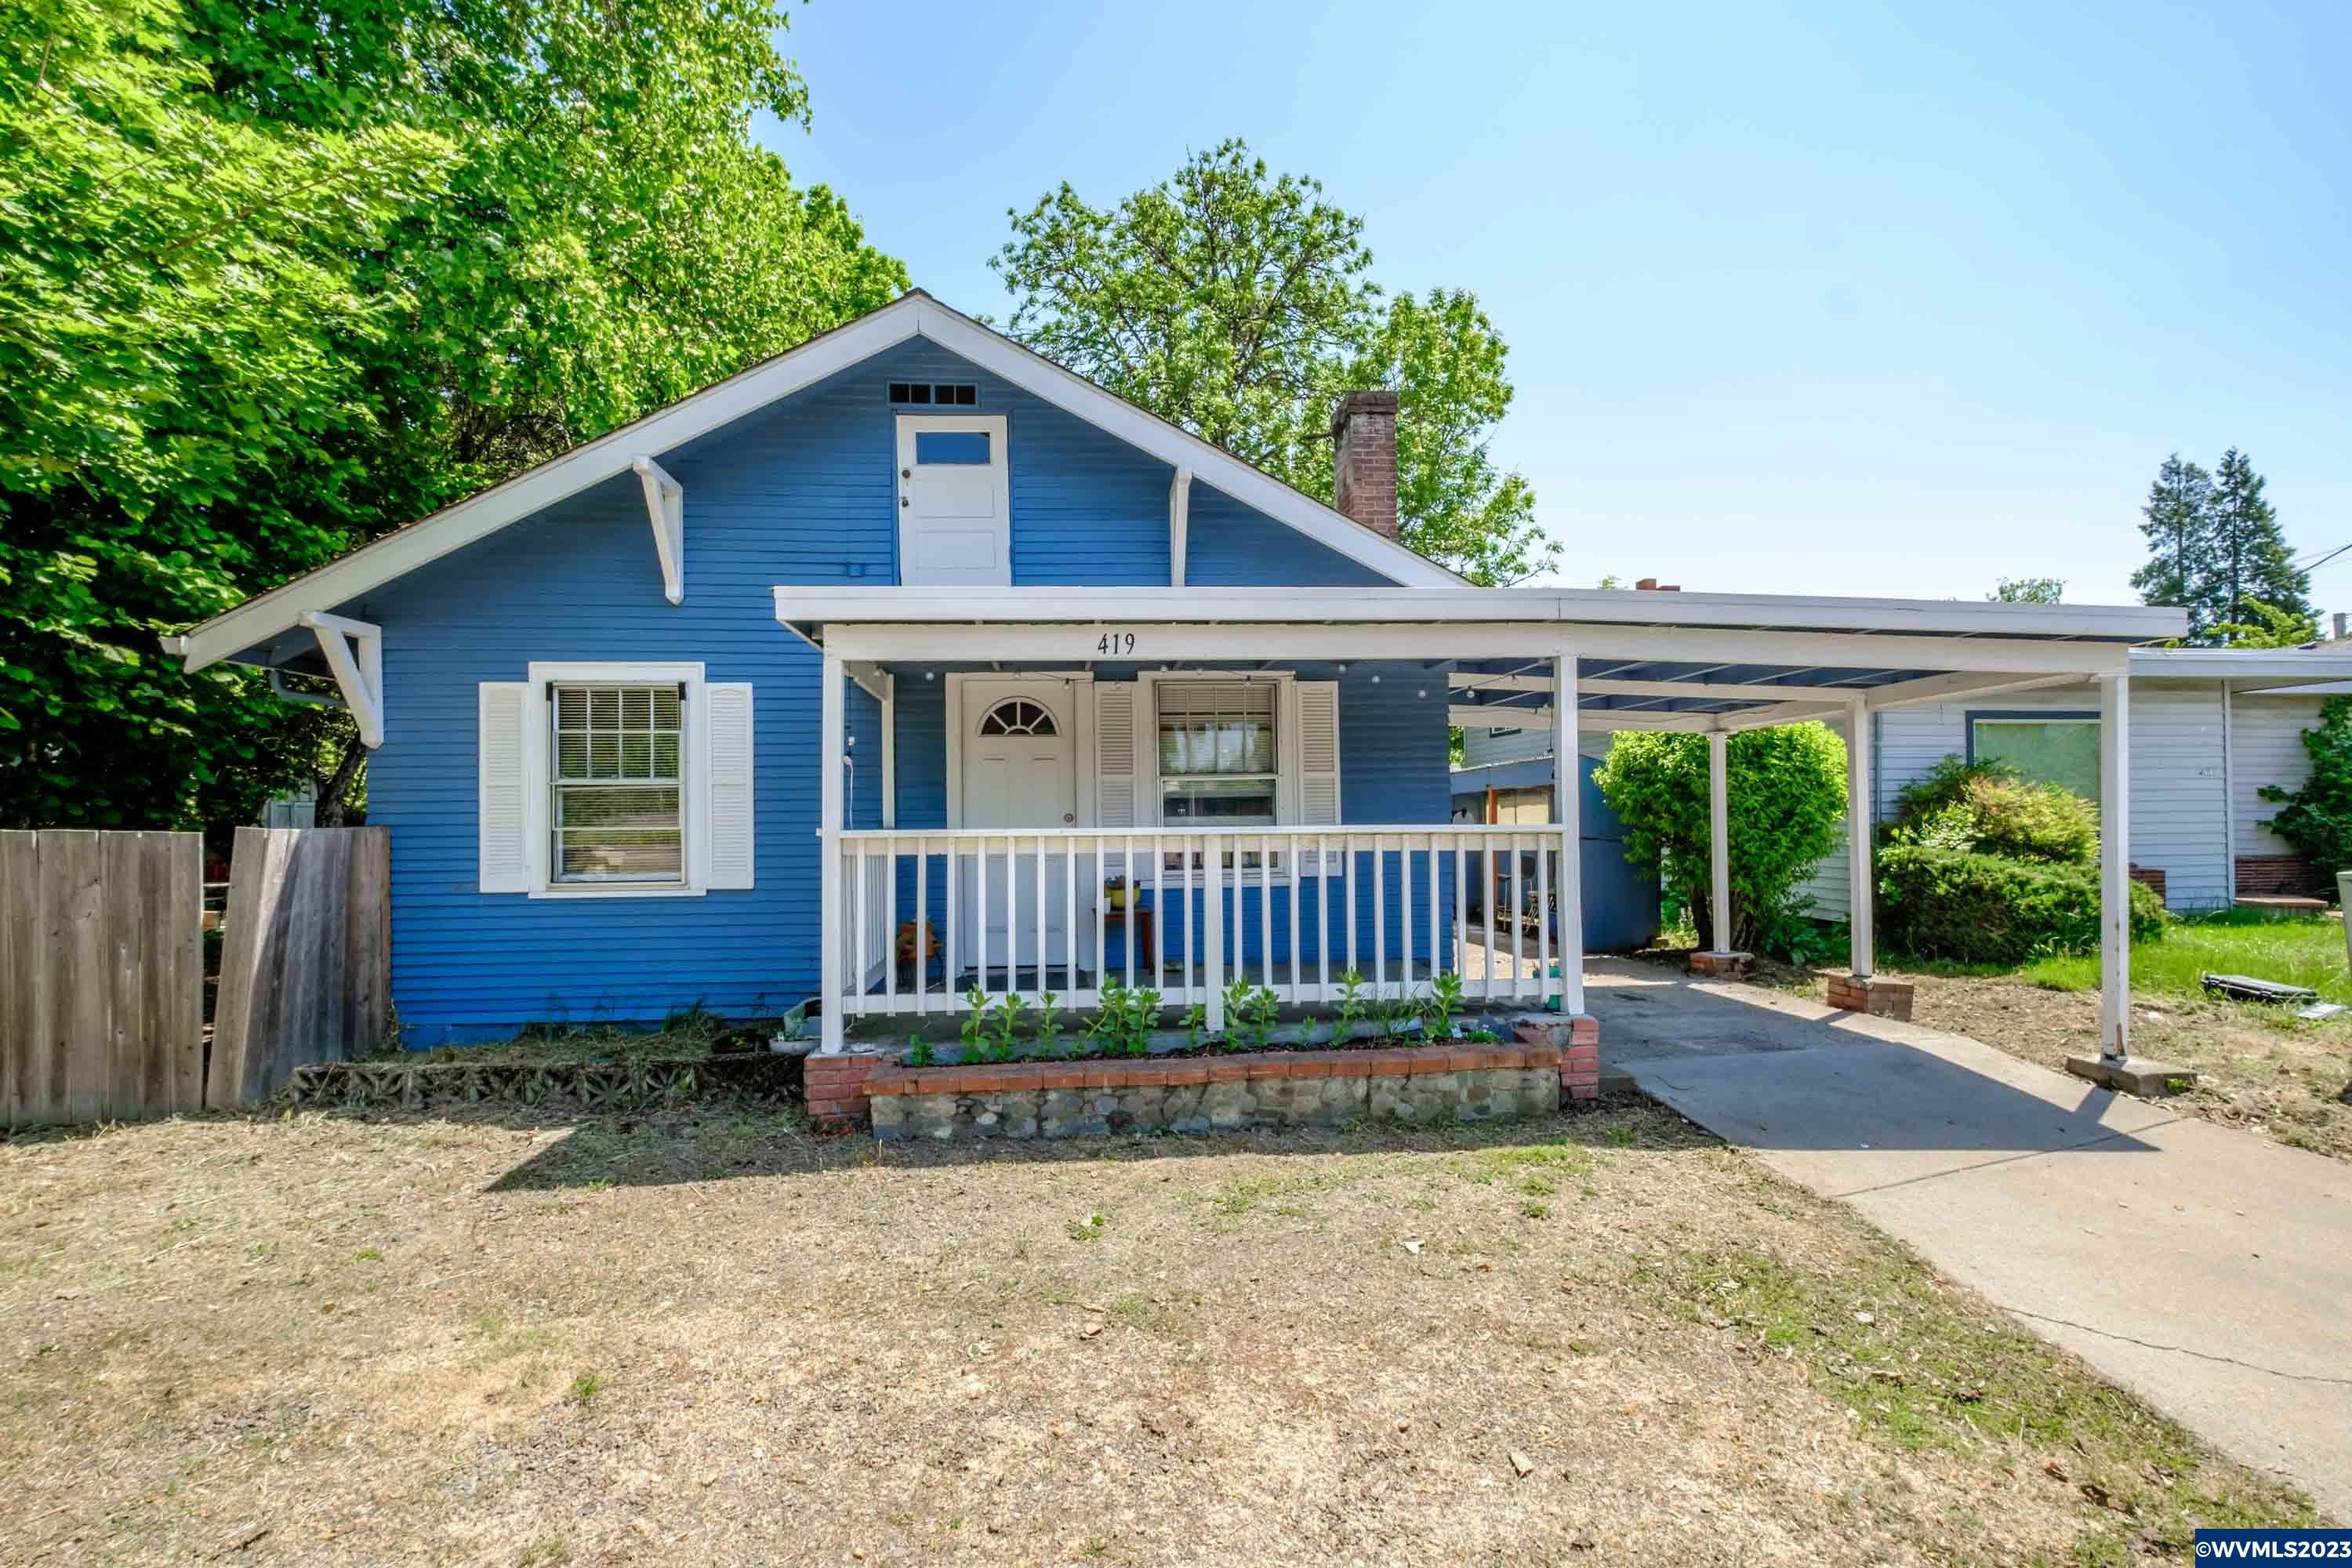 Charming 3-bedroom, 1-bath craftsman bungalow close to OSU campus, Fred Meyer, Chintimini Park. Large living room w/ new flooring & a fireplace. Dining area has a bult-in hutch. The well-equipped kitchen w/dishwasher. Bath includes shower/bath combo & plenty of storage. Heated & insolated finished garage used as a bonus space for home gym/extra storage/study area. Washer & dryer w/sink. Private back yard. Ample attic storage. Fresh interior/exterior paint. Call to see this rare income producing opportunity!